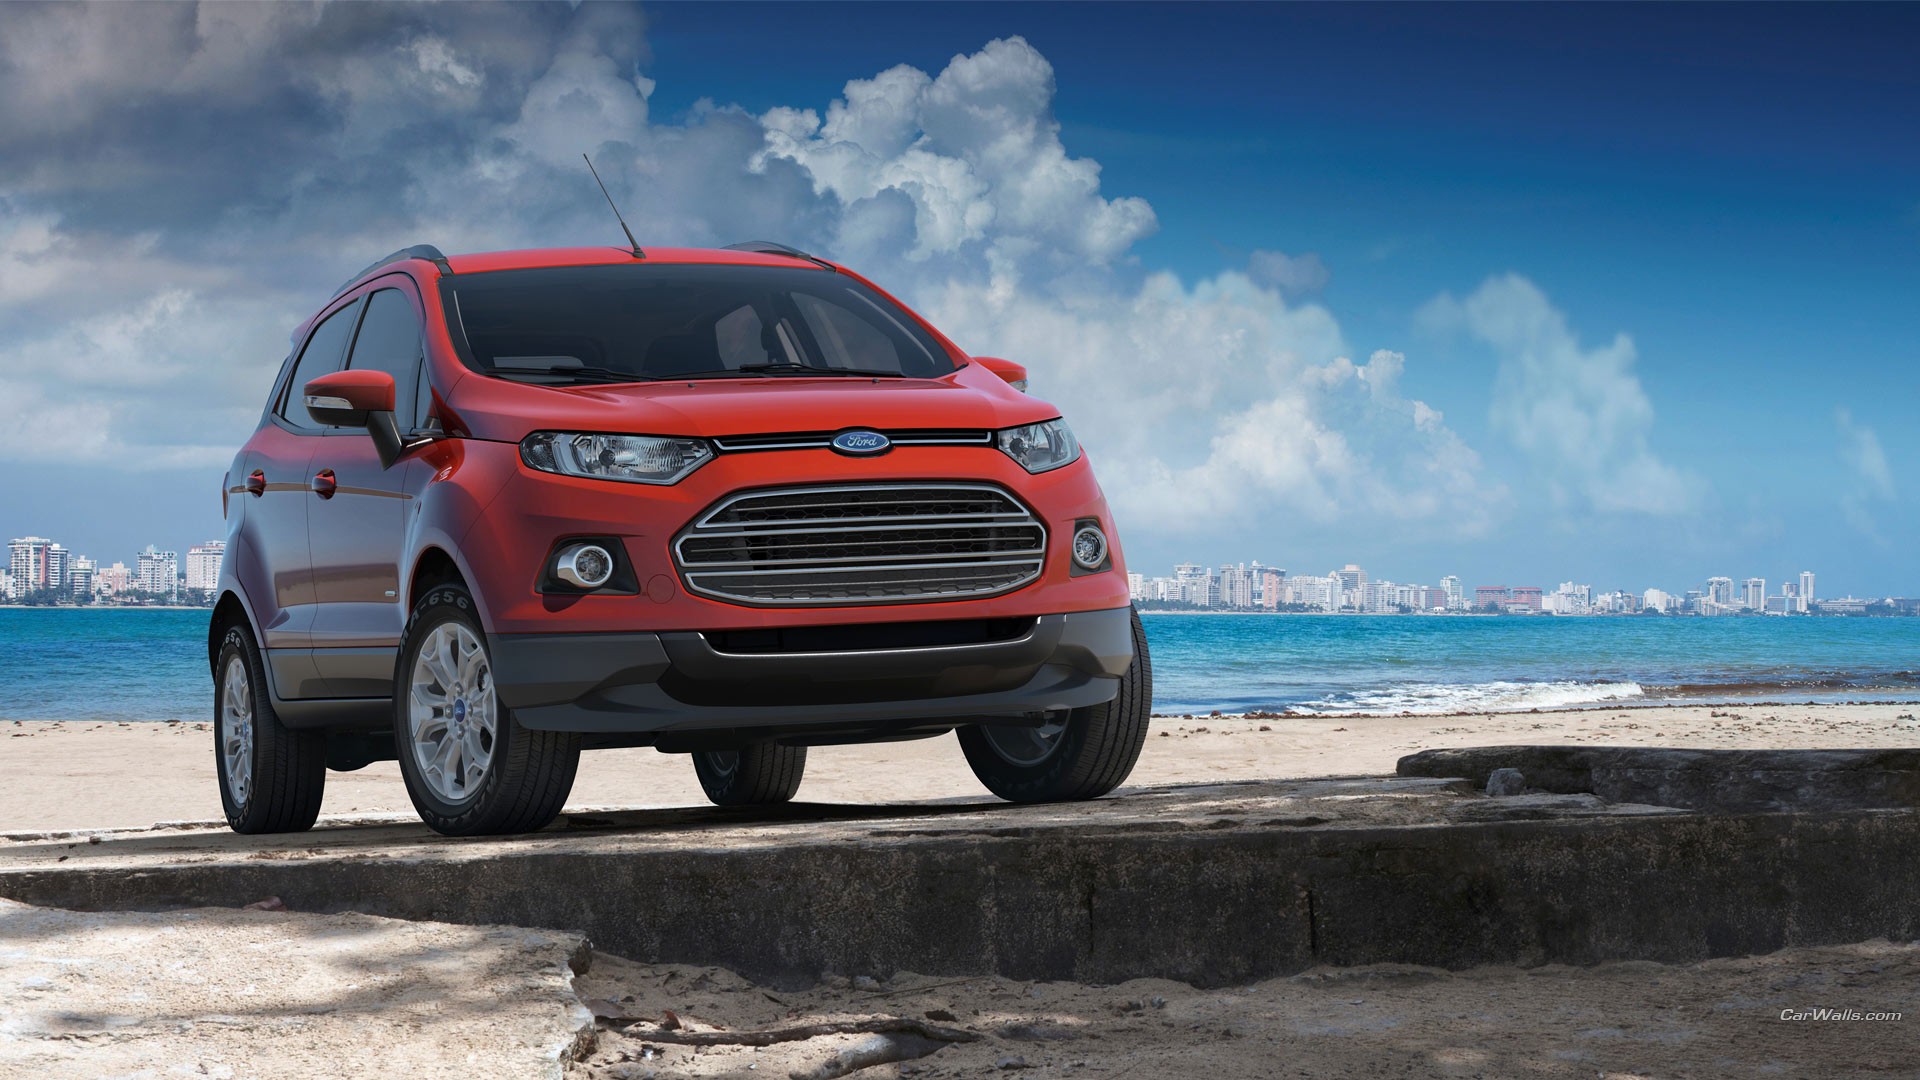 General 1920x1080 Ford EcoSport Ford red cars car vehicle SUV Brazilian cars